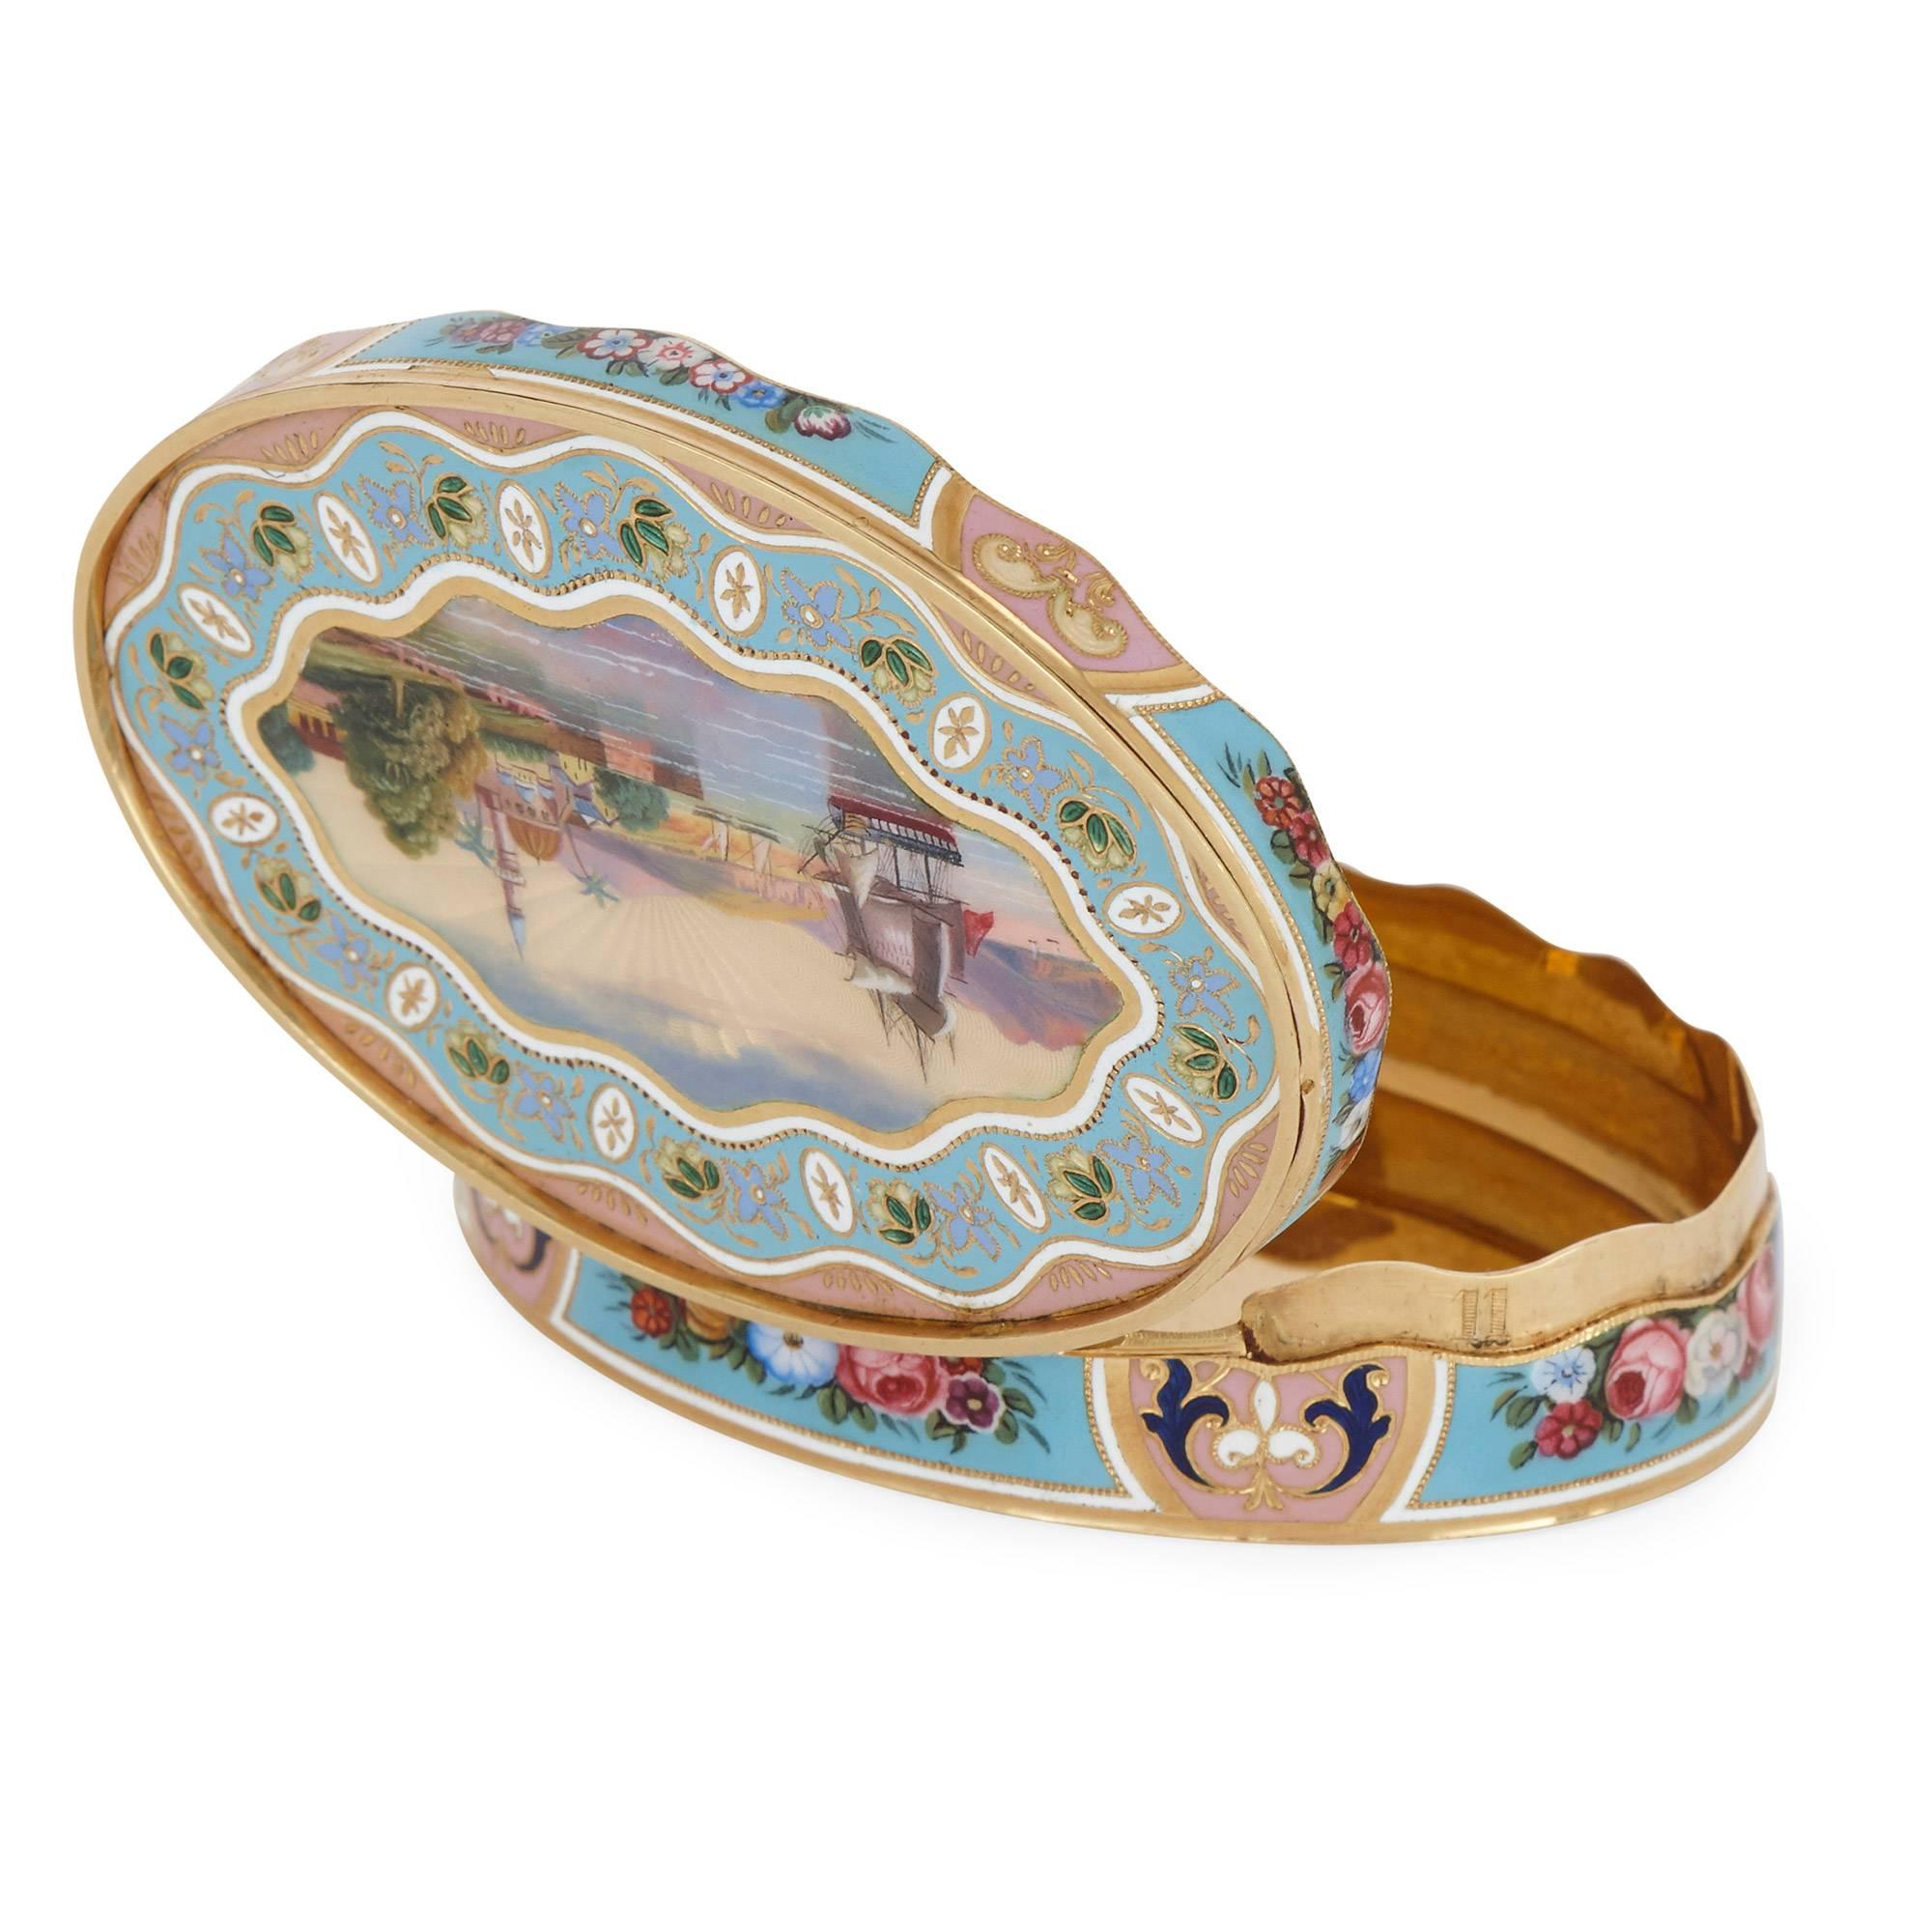 Gold Swiss solid gold snuff box with enameled decorations